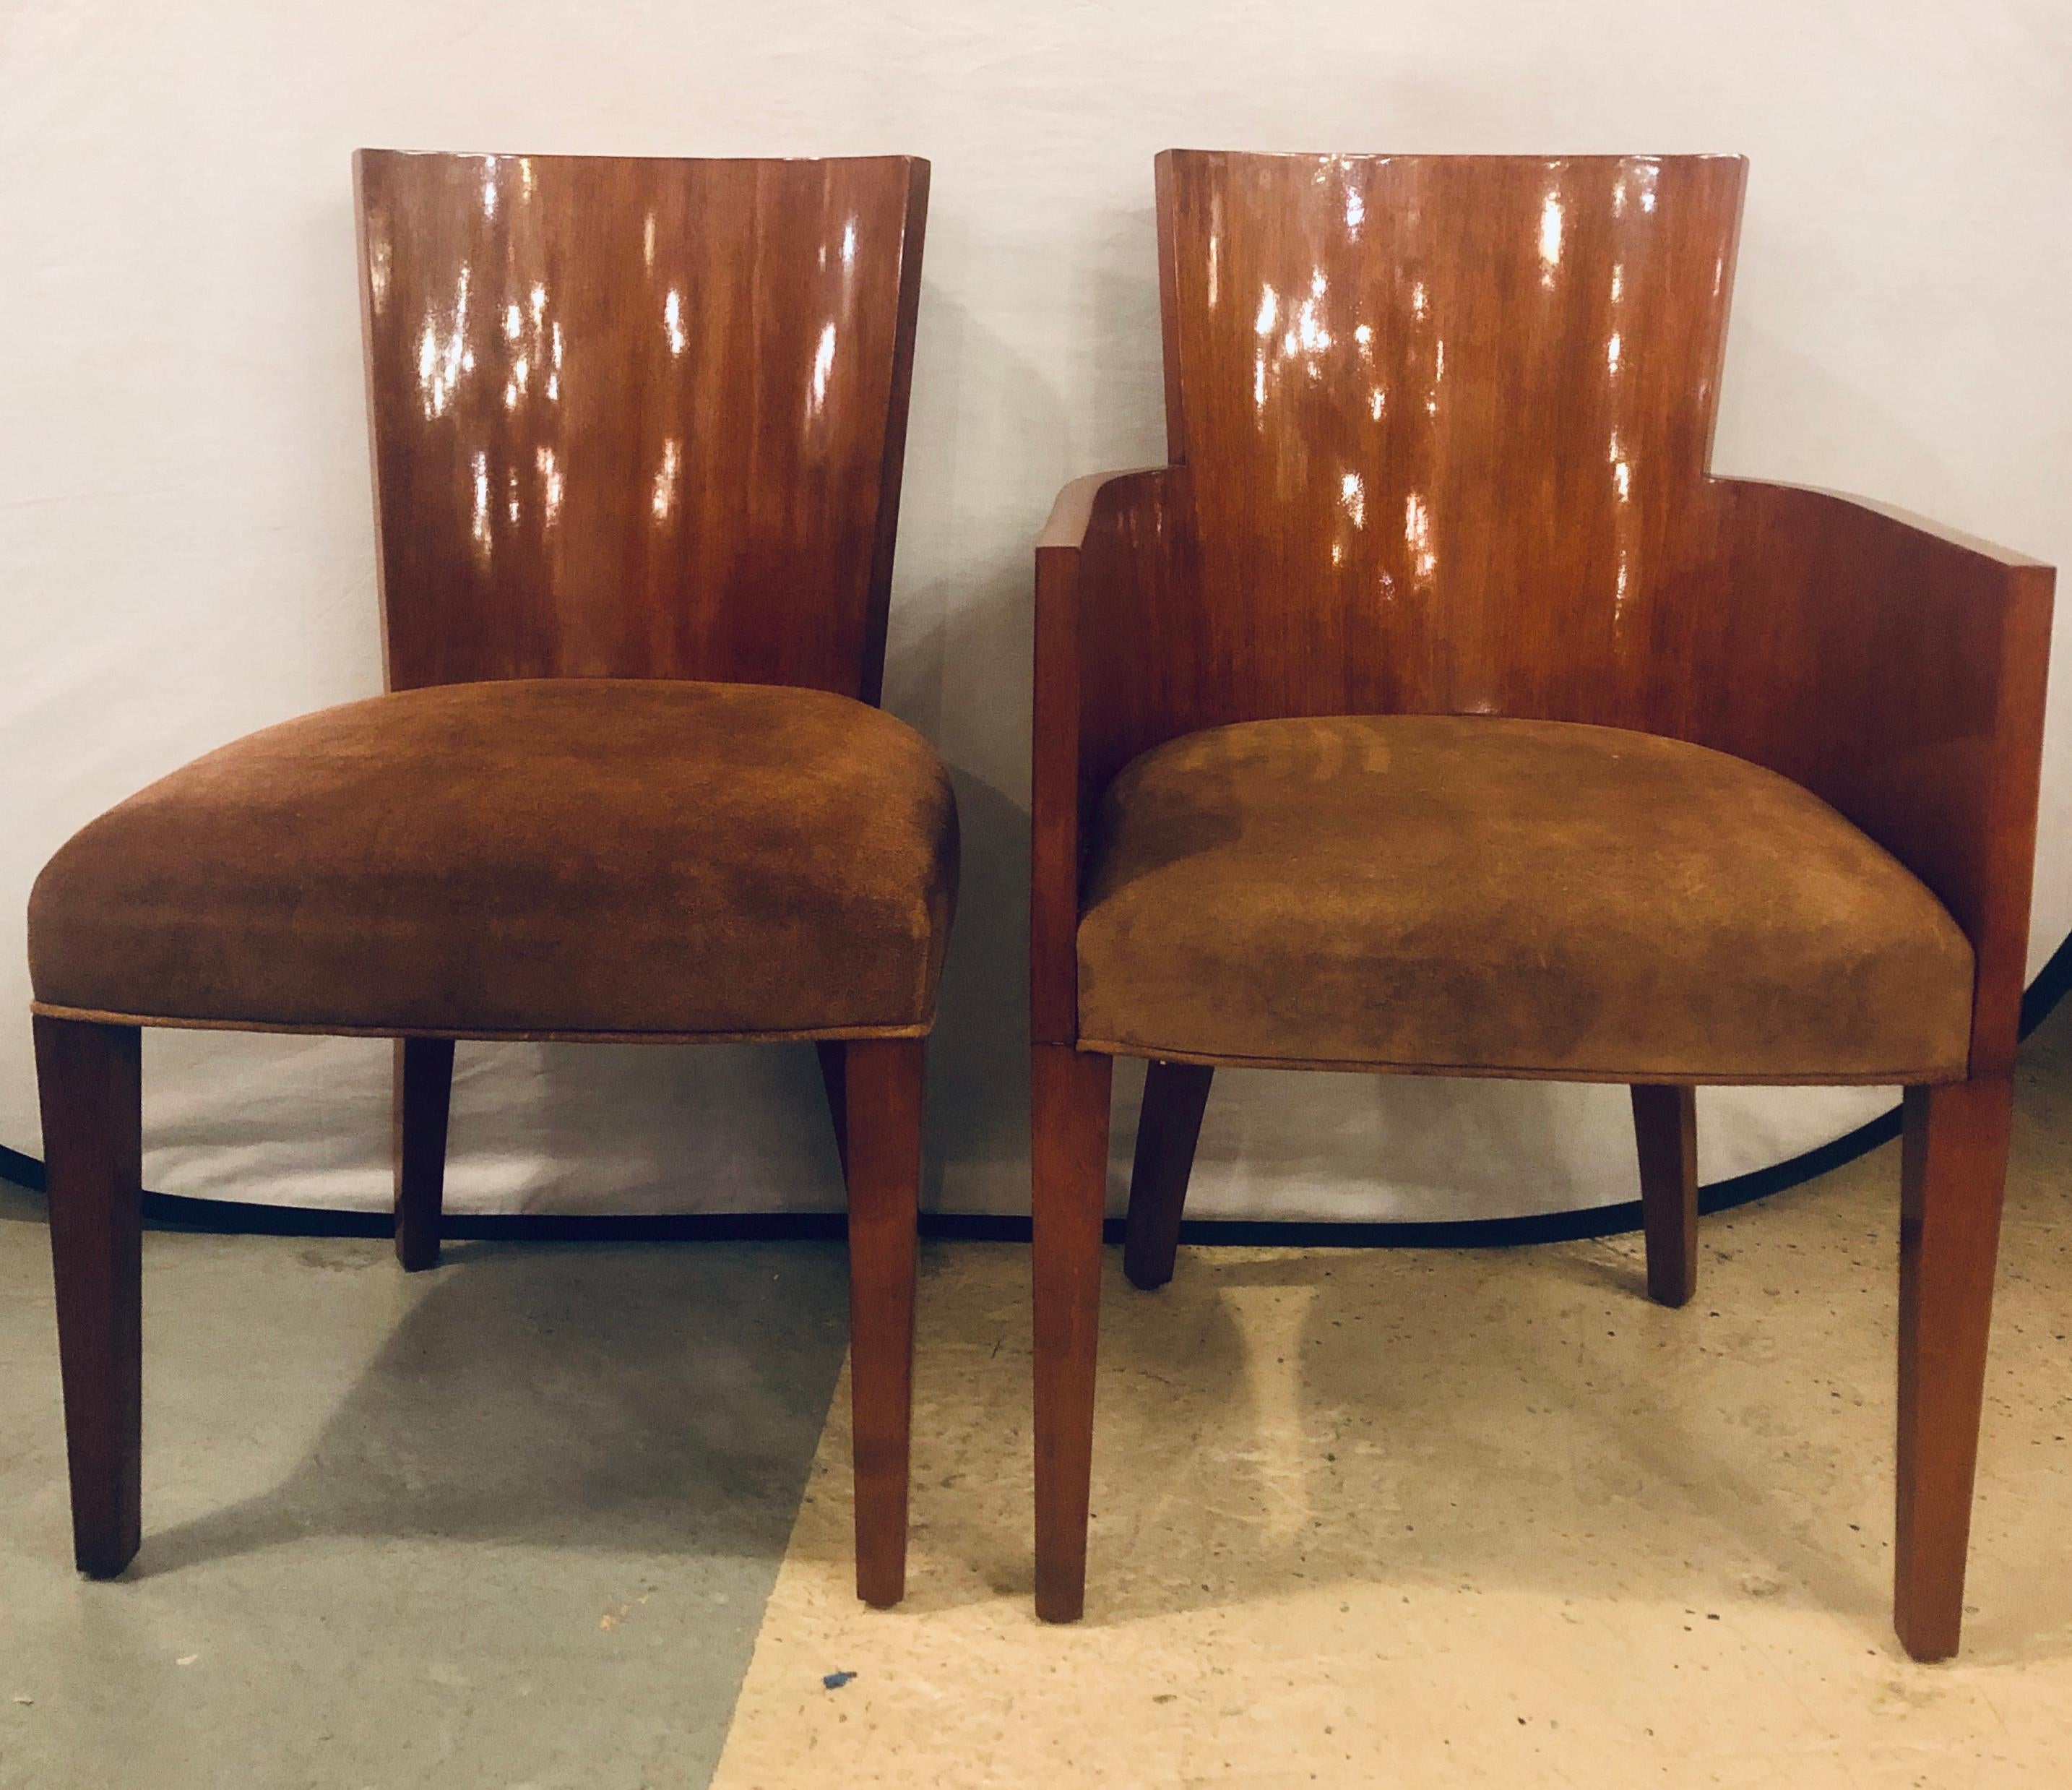 8 Modern Hollywood Mahogany Ralph Lauren Dining Chairs with Suede Seats 6 and 2 9